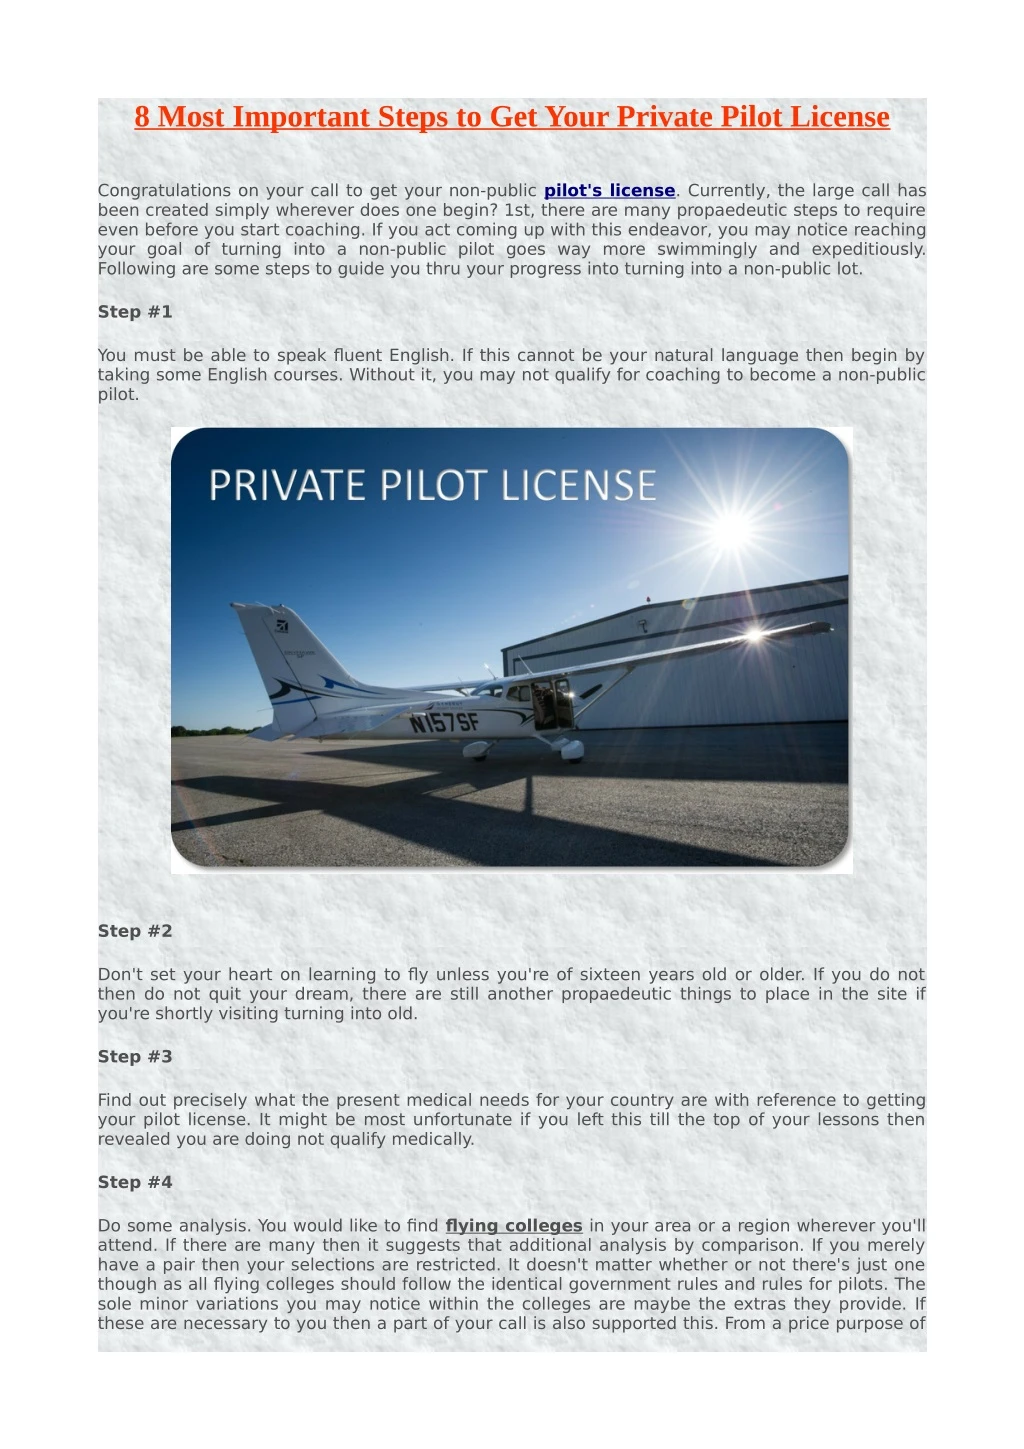 8 most important steps to get your private pilot